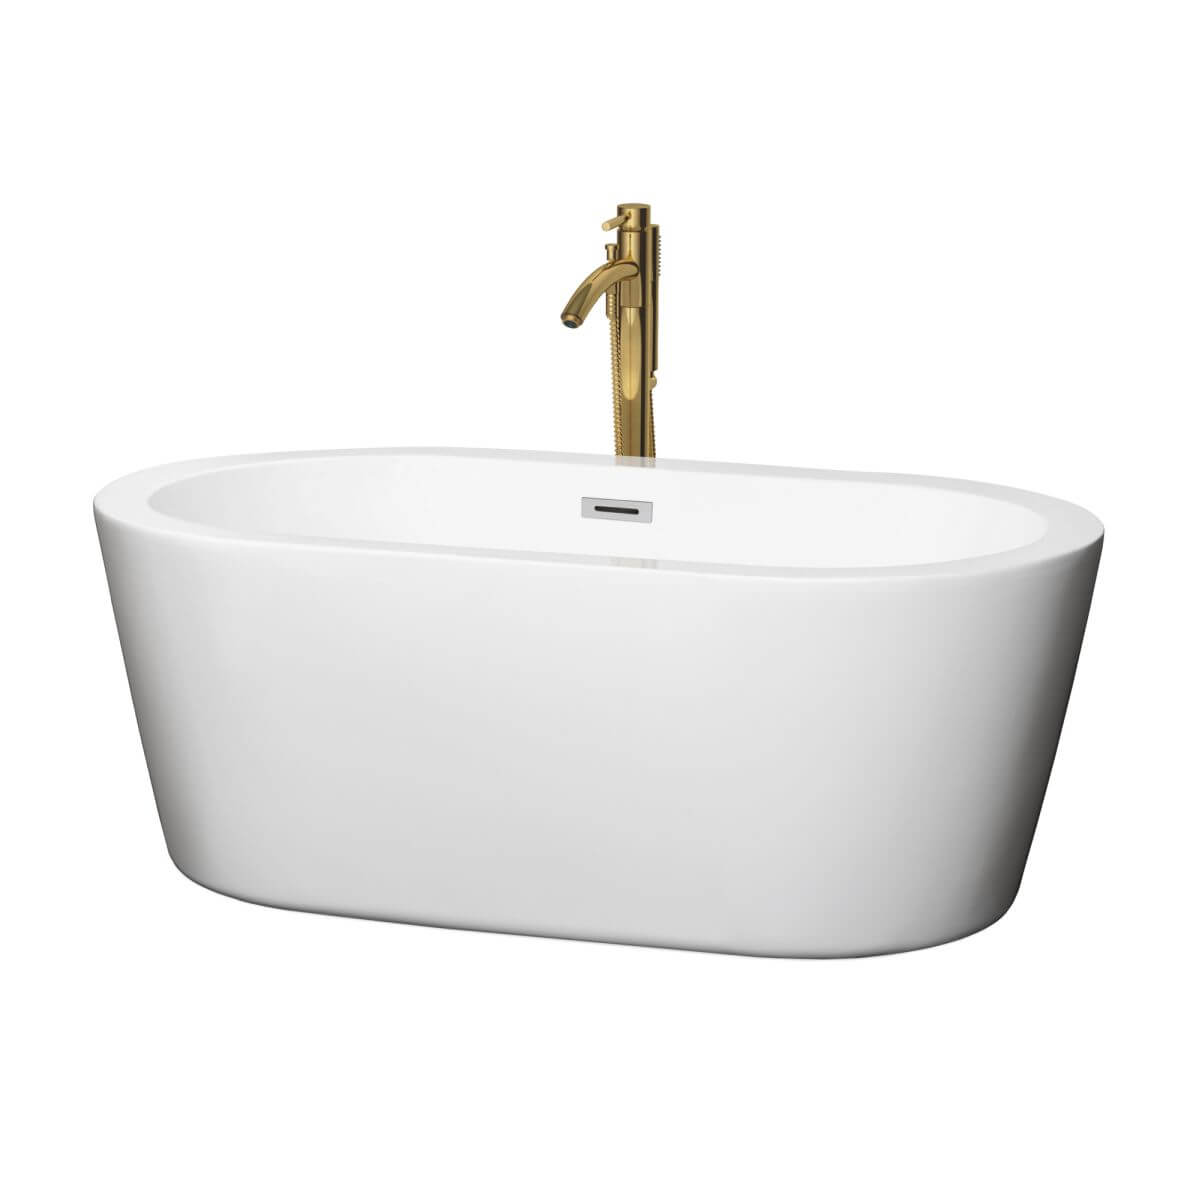 Wyndham Collection Mermaid 60 inch Freestanding Bathtub in White with Polished Chrome Trim and Floor Mounted Faucet in Brushed Gold - WCOBT100360PCATPGD